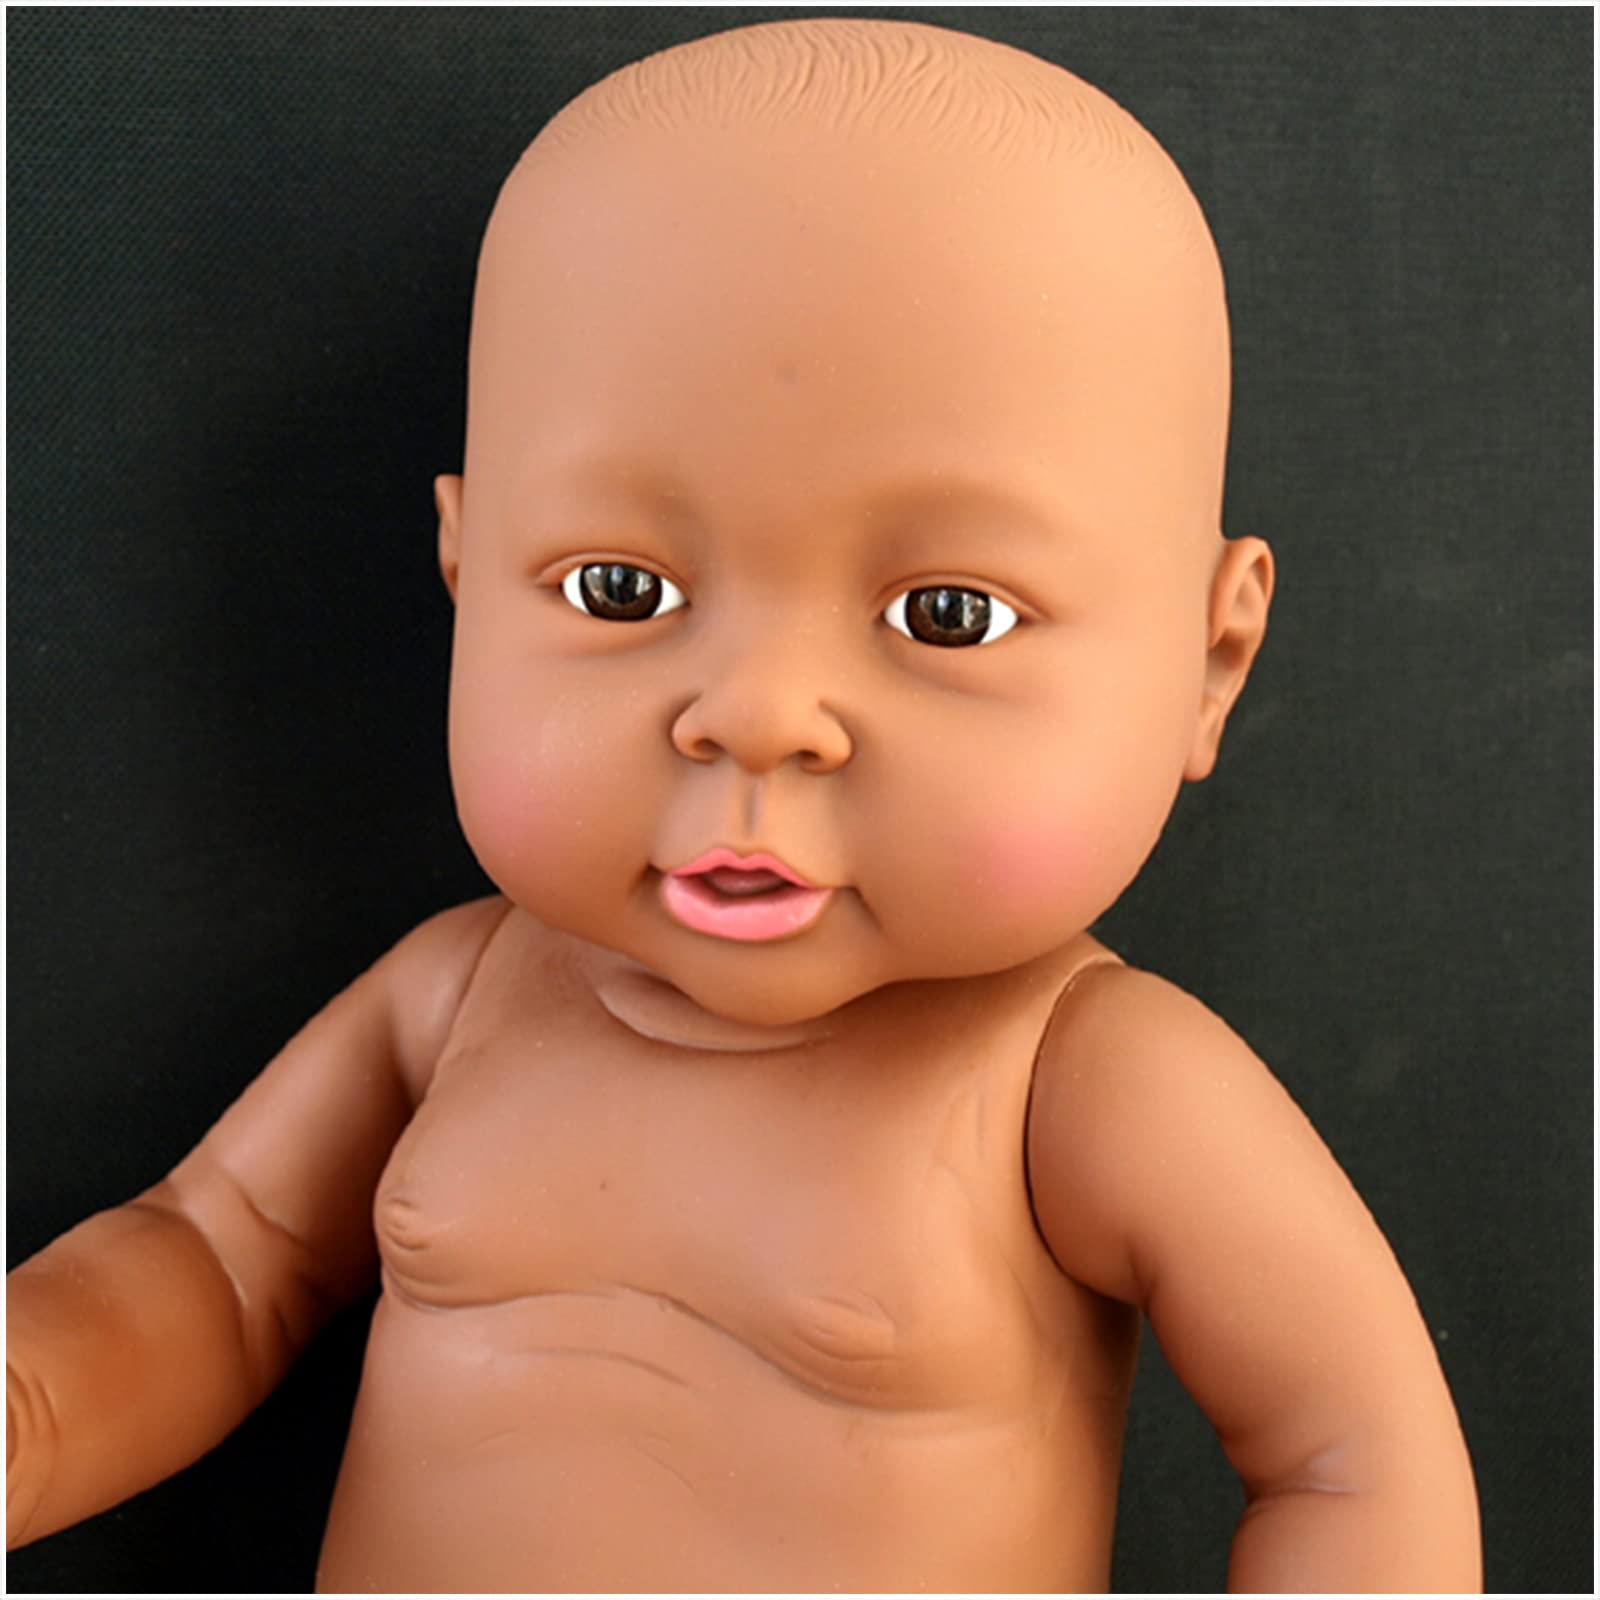 KH66ZKY Lifelike Reborn Baby Dolls 16.1 Inches Silicone Vinyl Infant Care Model for Teaching Gynecology Educational Medical Science Model,Girl